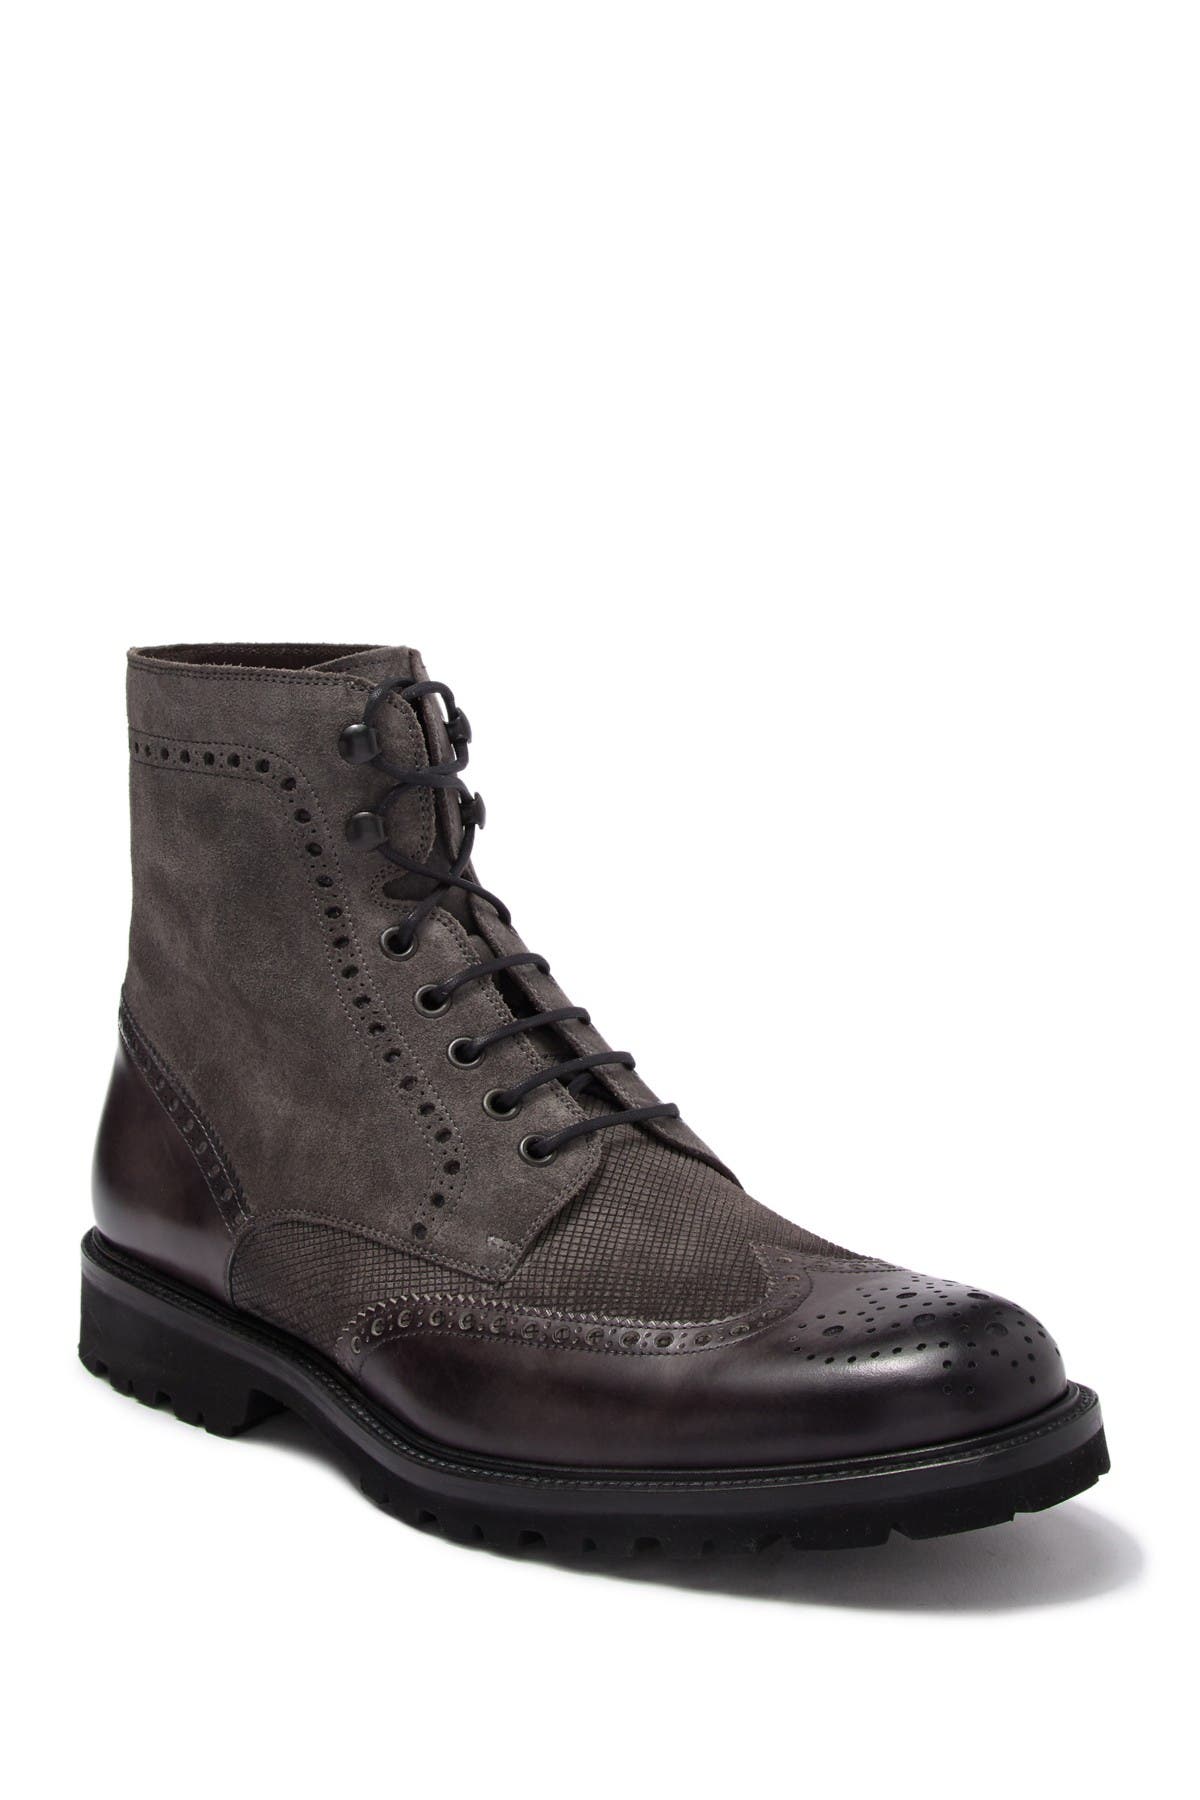 Magnanni | Enzo II Leather Boot 